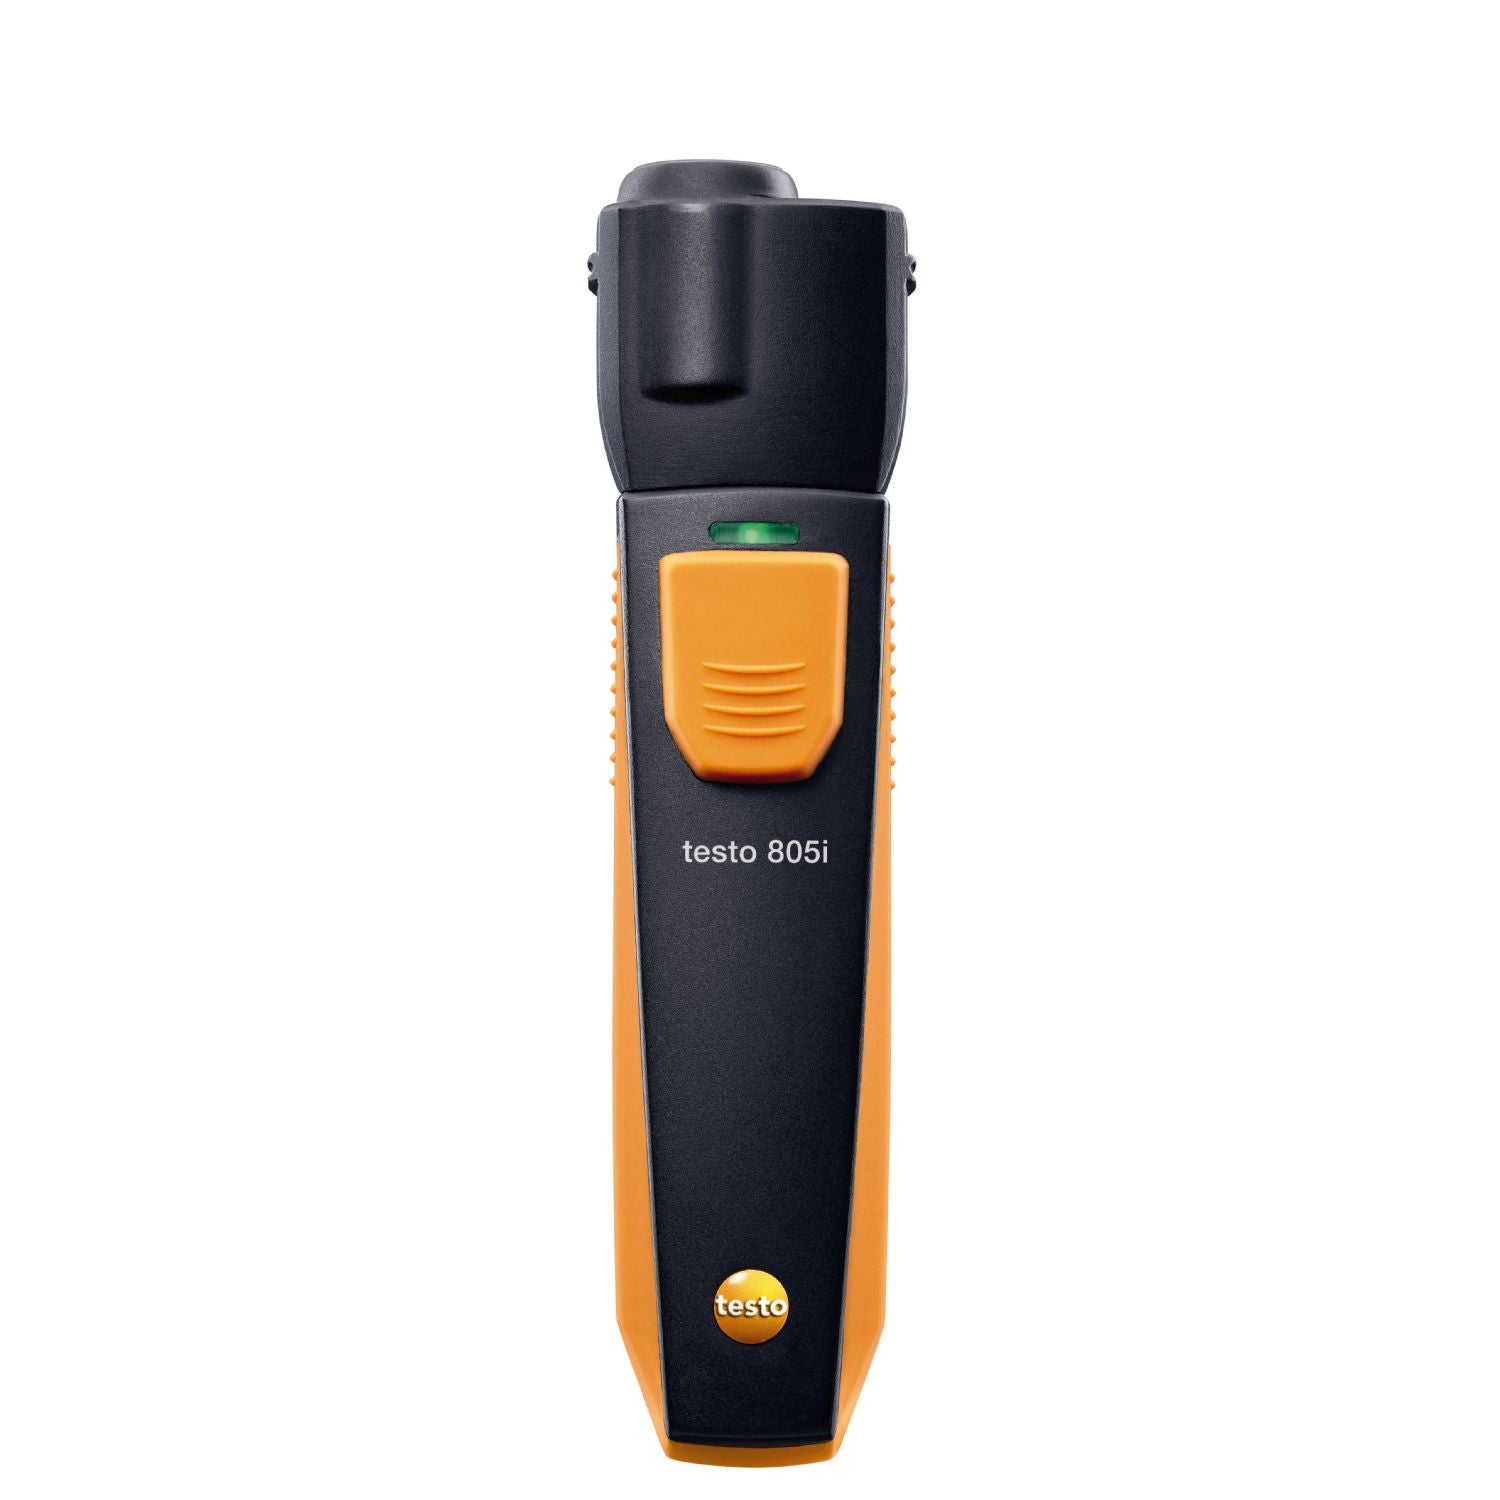 INFRARED THERMOMETER—operated via Smart App